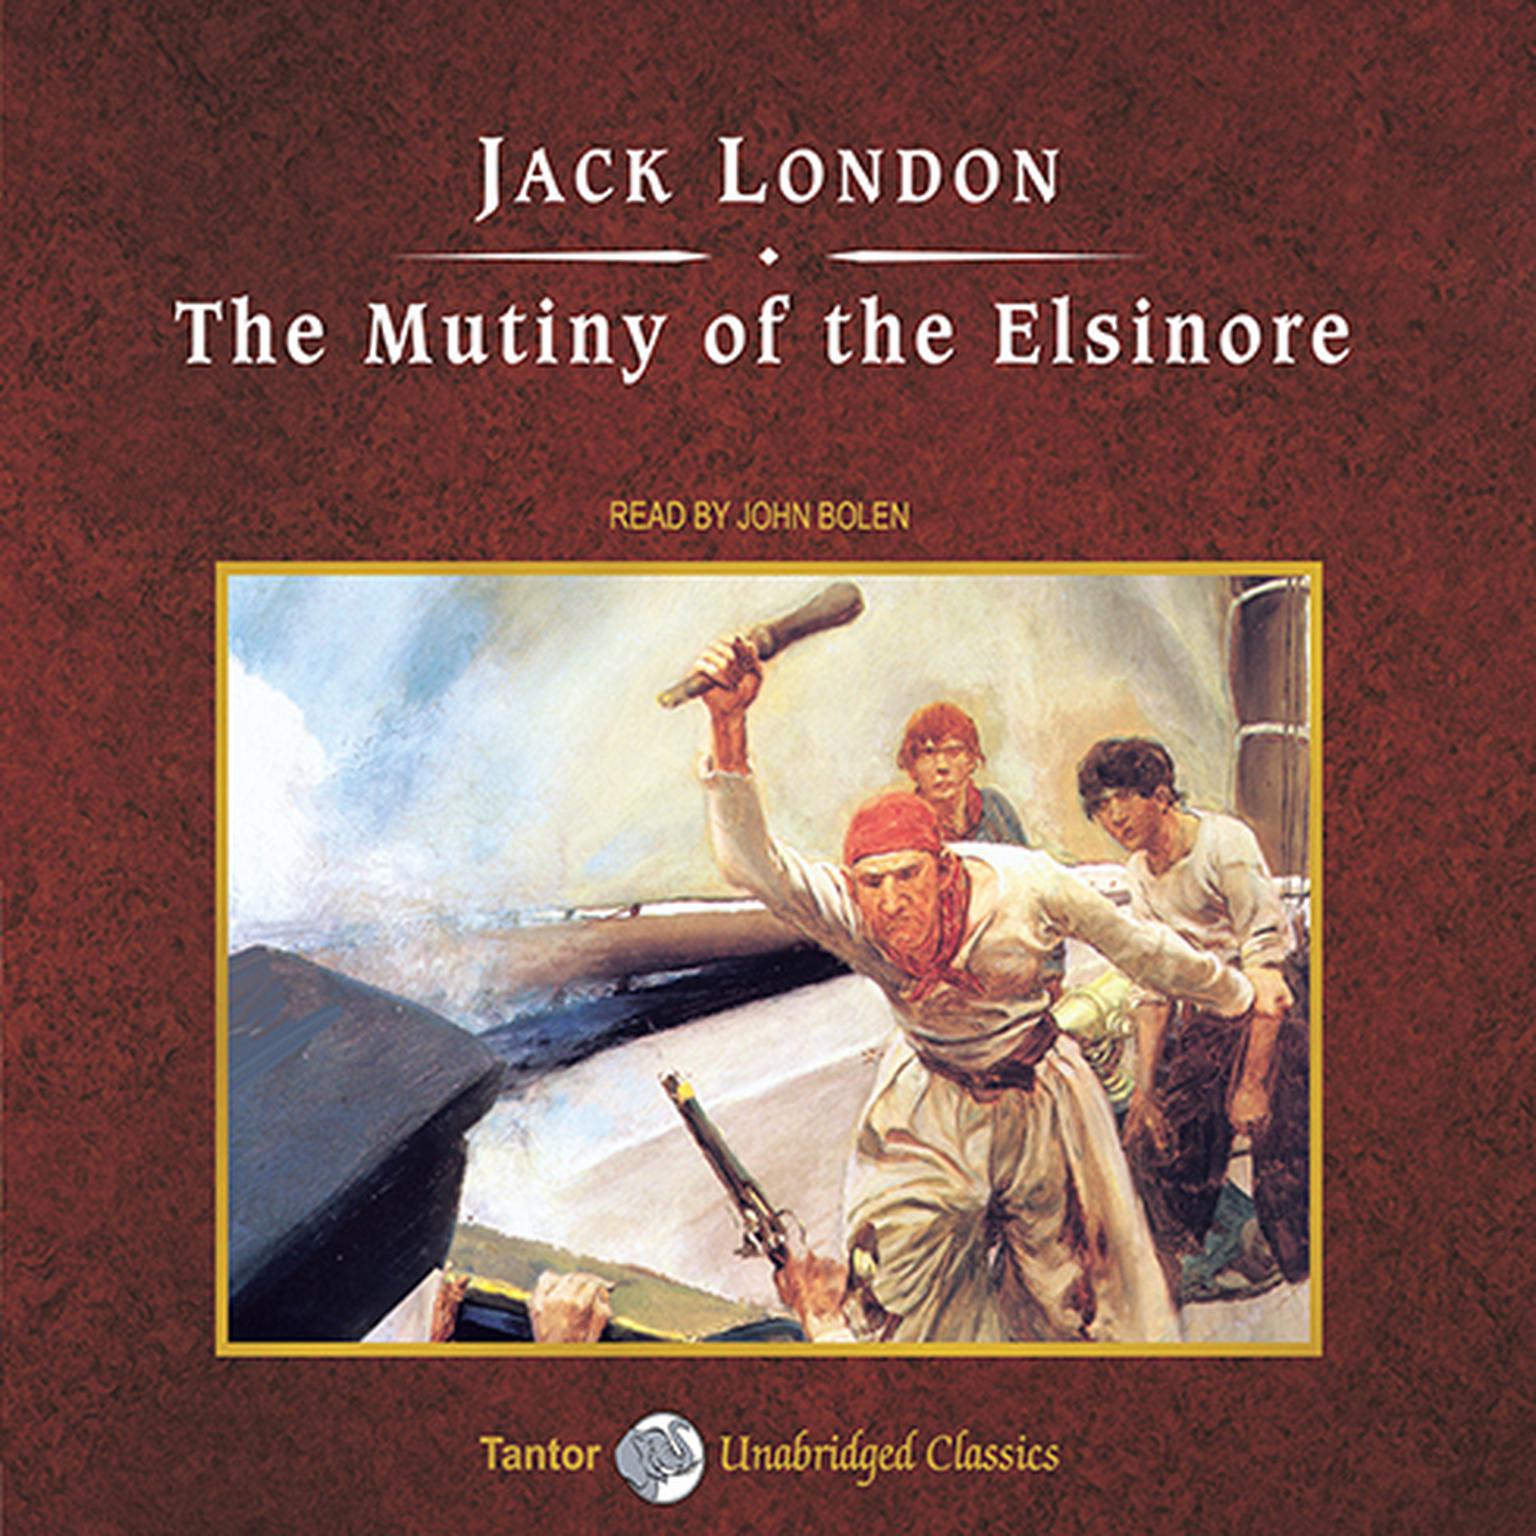 The Mutiny of the Elsinore, with eBook Audiobook, by Jack London